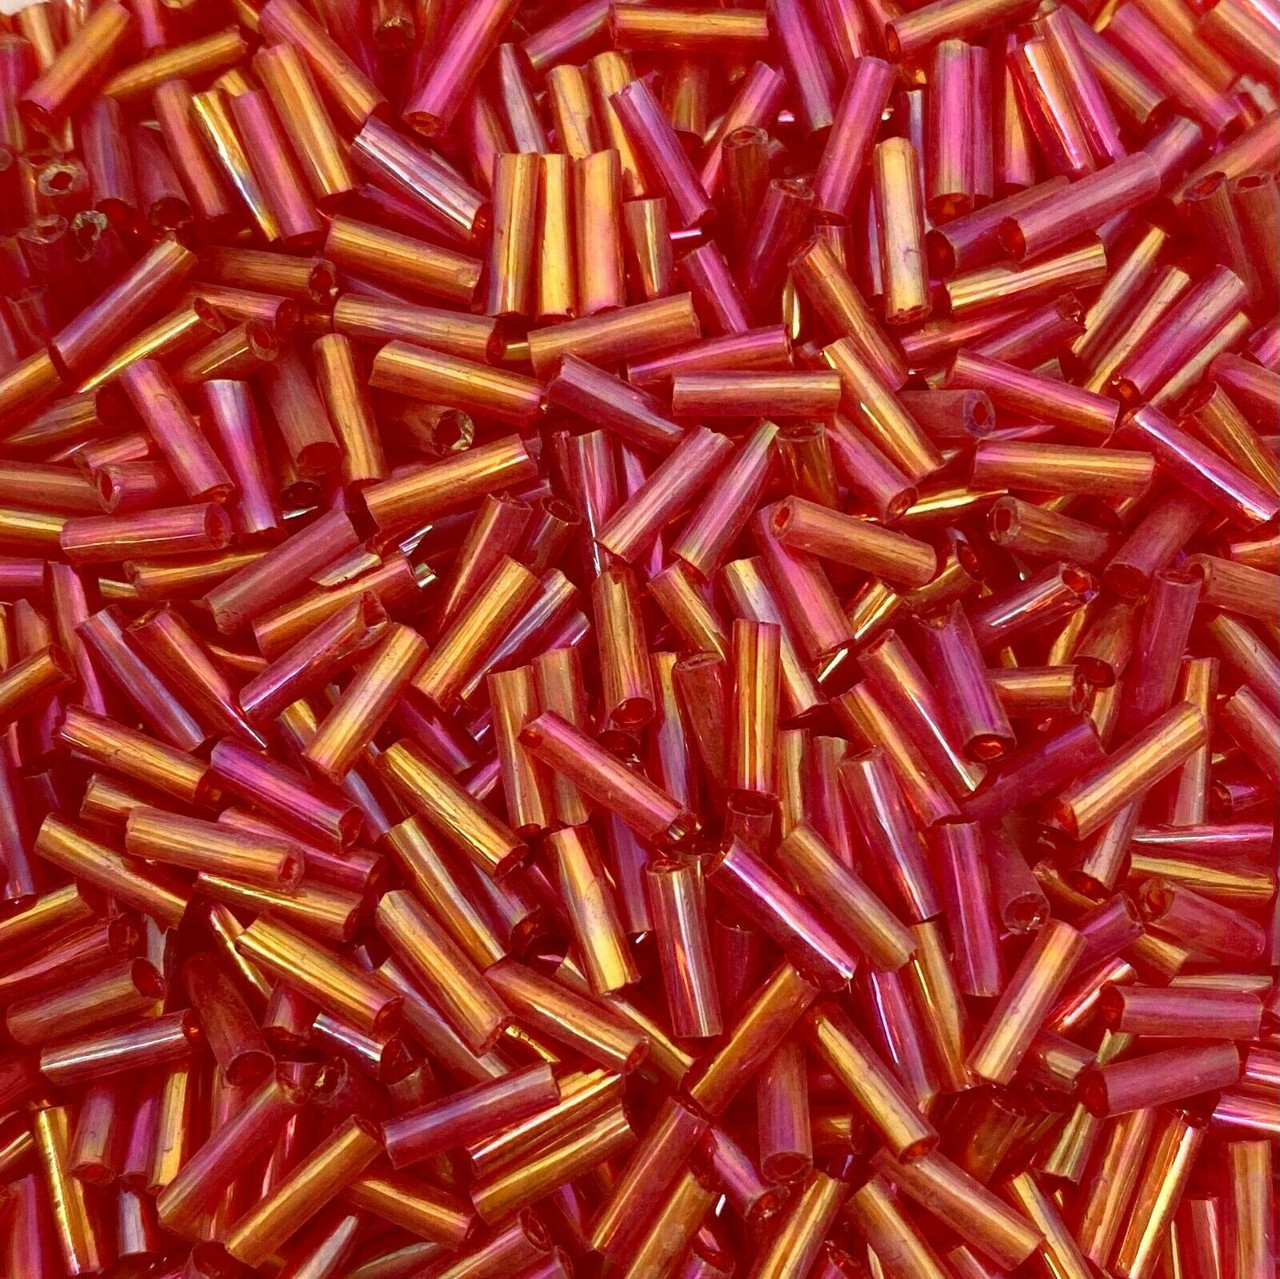 50g glass bugle beads - Red Rainbow - approx 6mm tubes, jewellery making